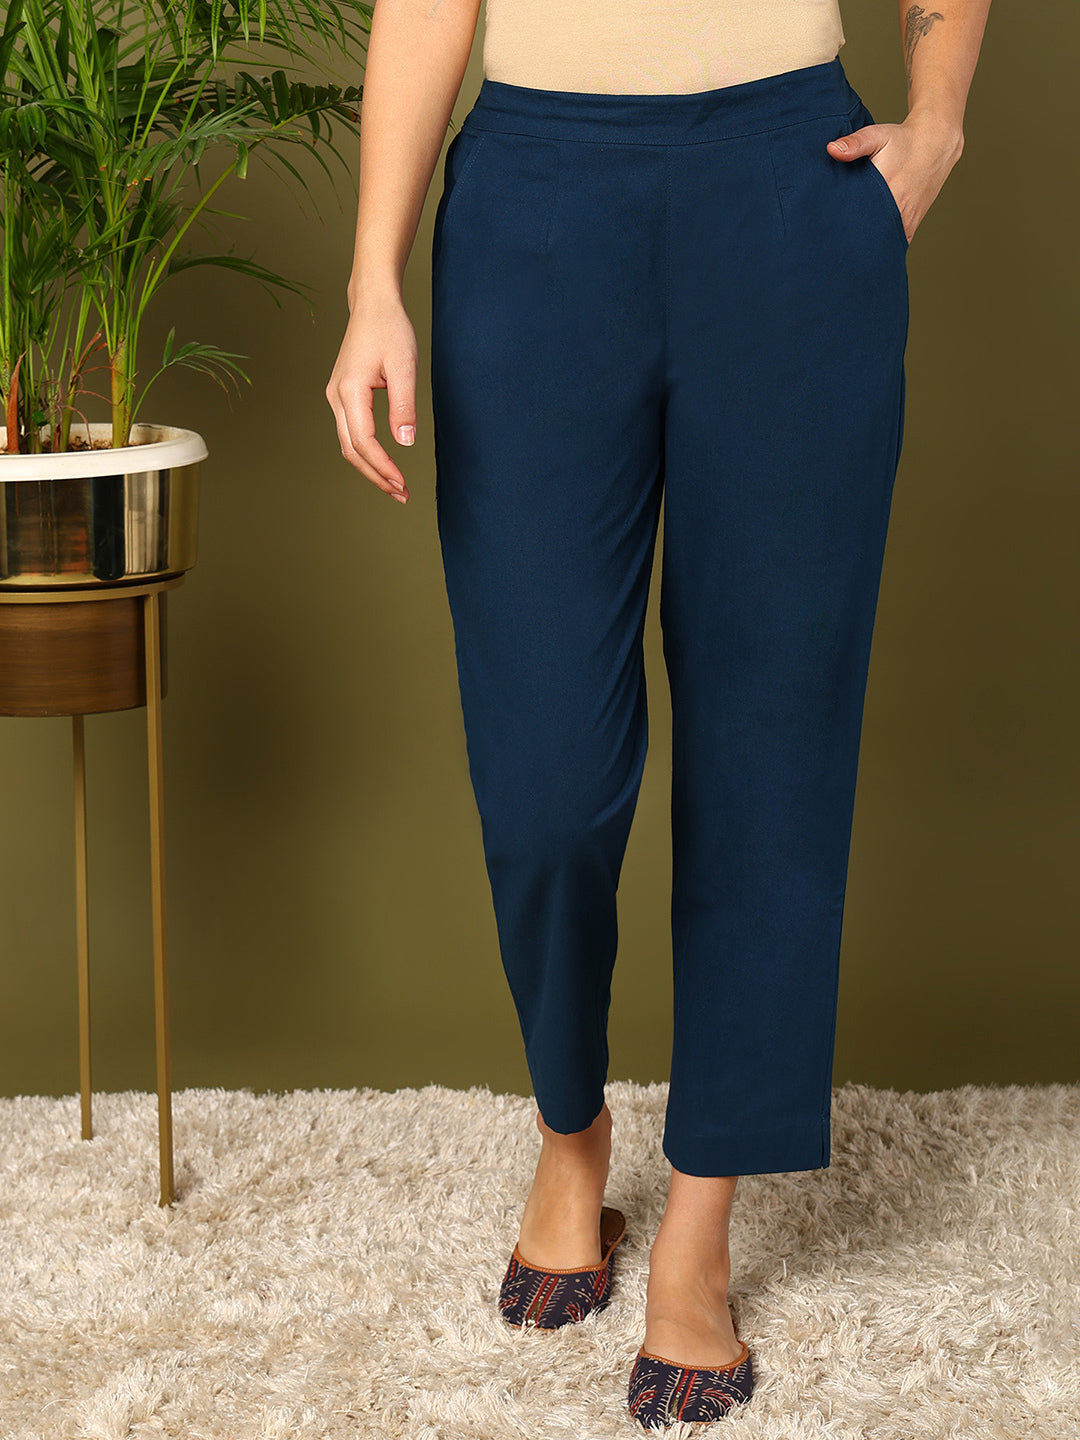 Cigarette trousers made of solid-colored cotton sateen in mojito | The  official BASLER Online Shop - women's fashion brand with the highest  standards of quality